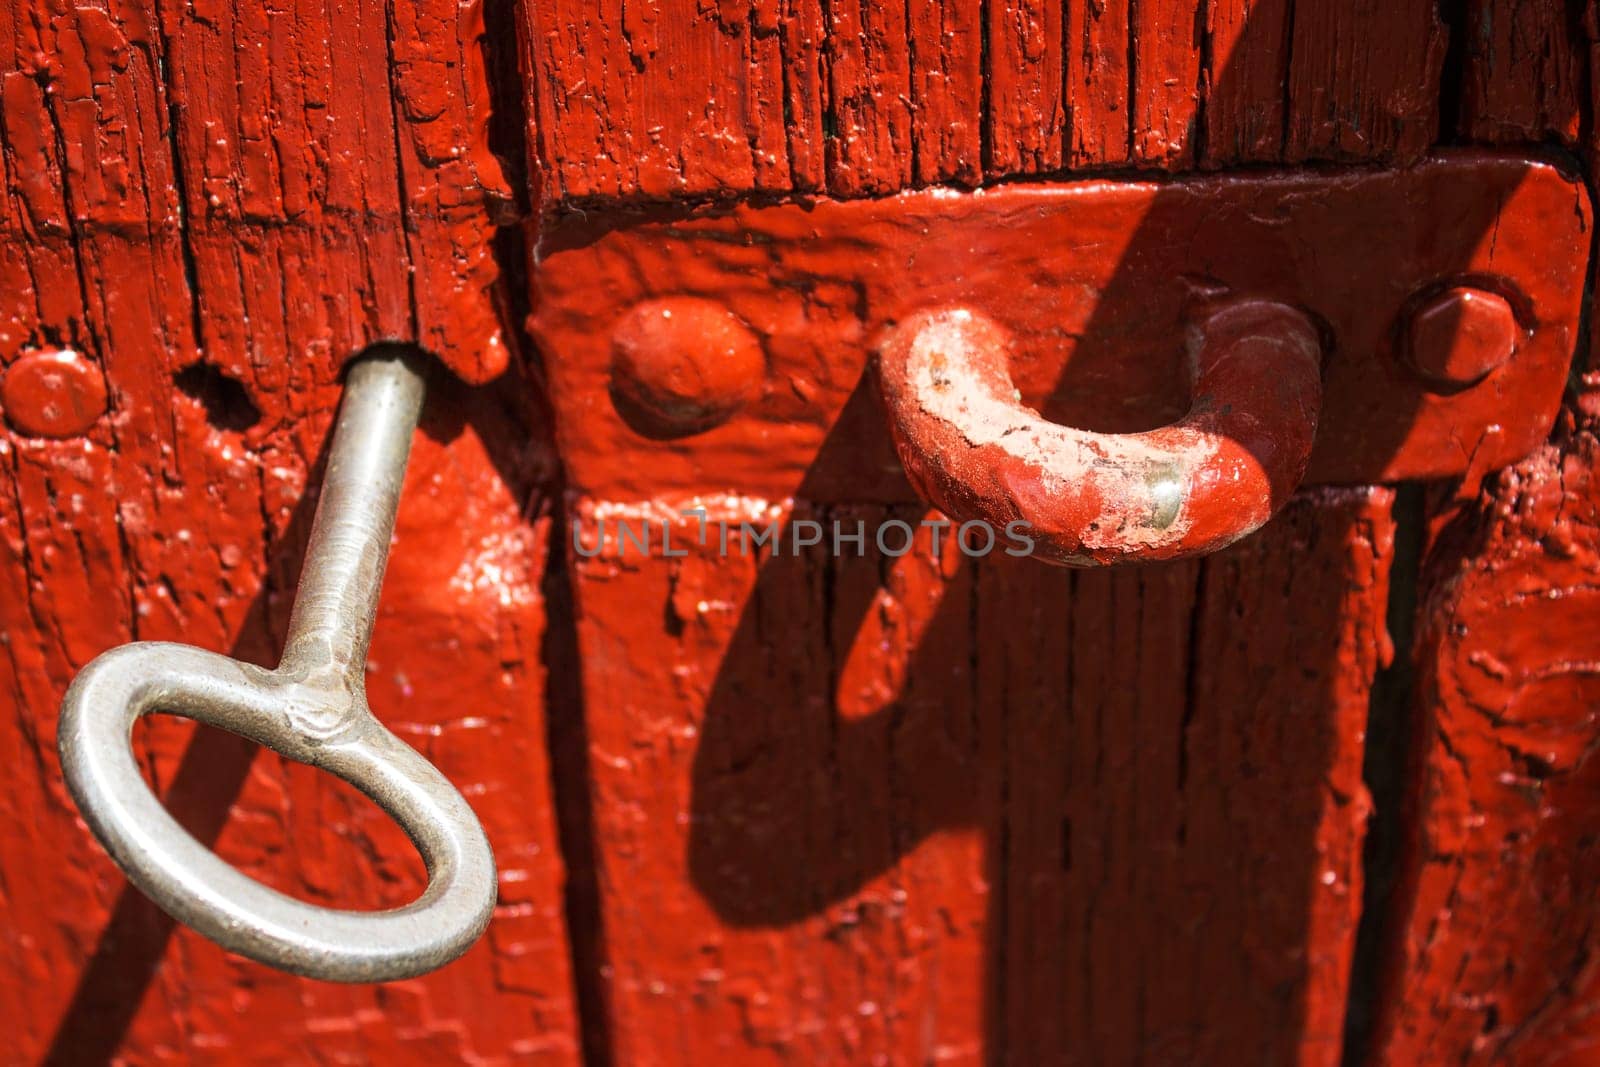 Antique iron key from the gate in the old red wooden gate. by Snegok1967